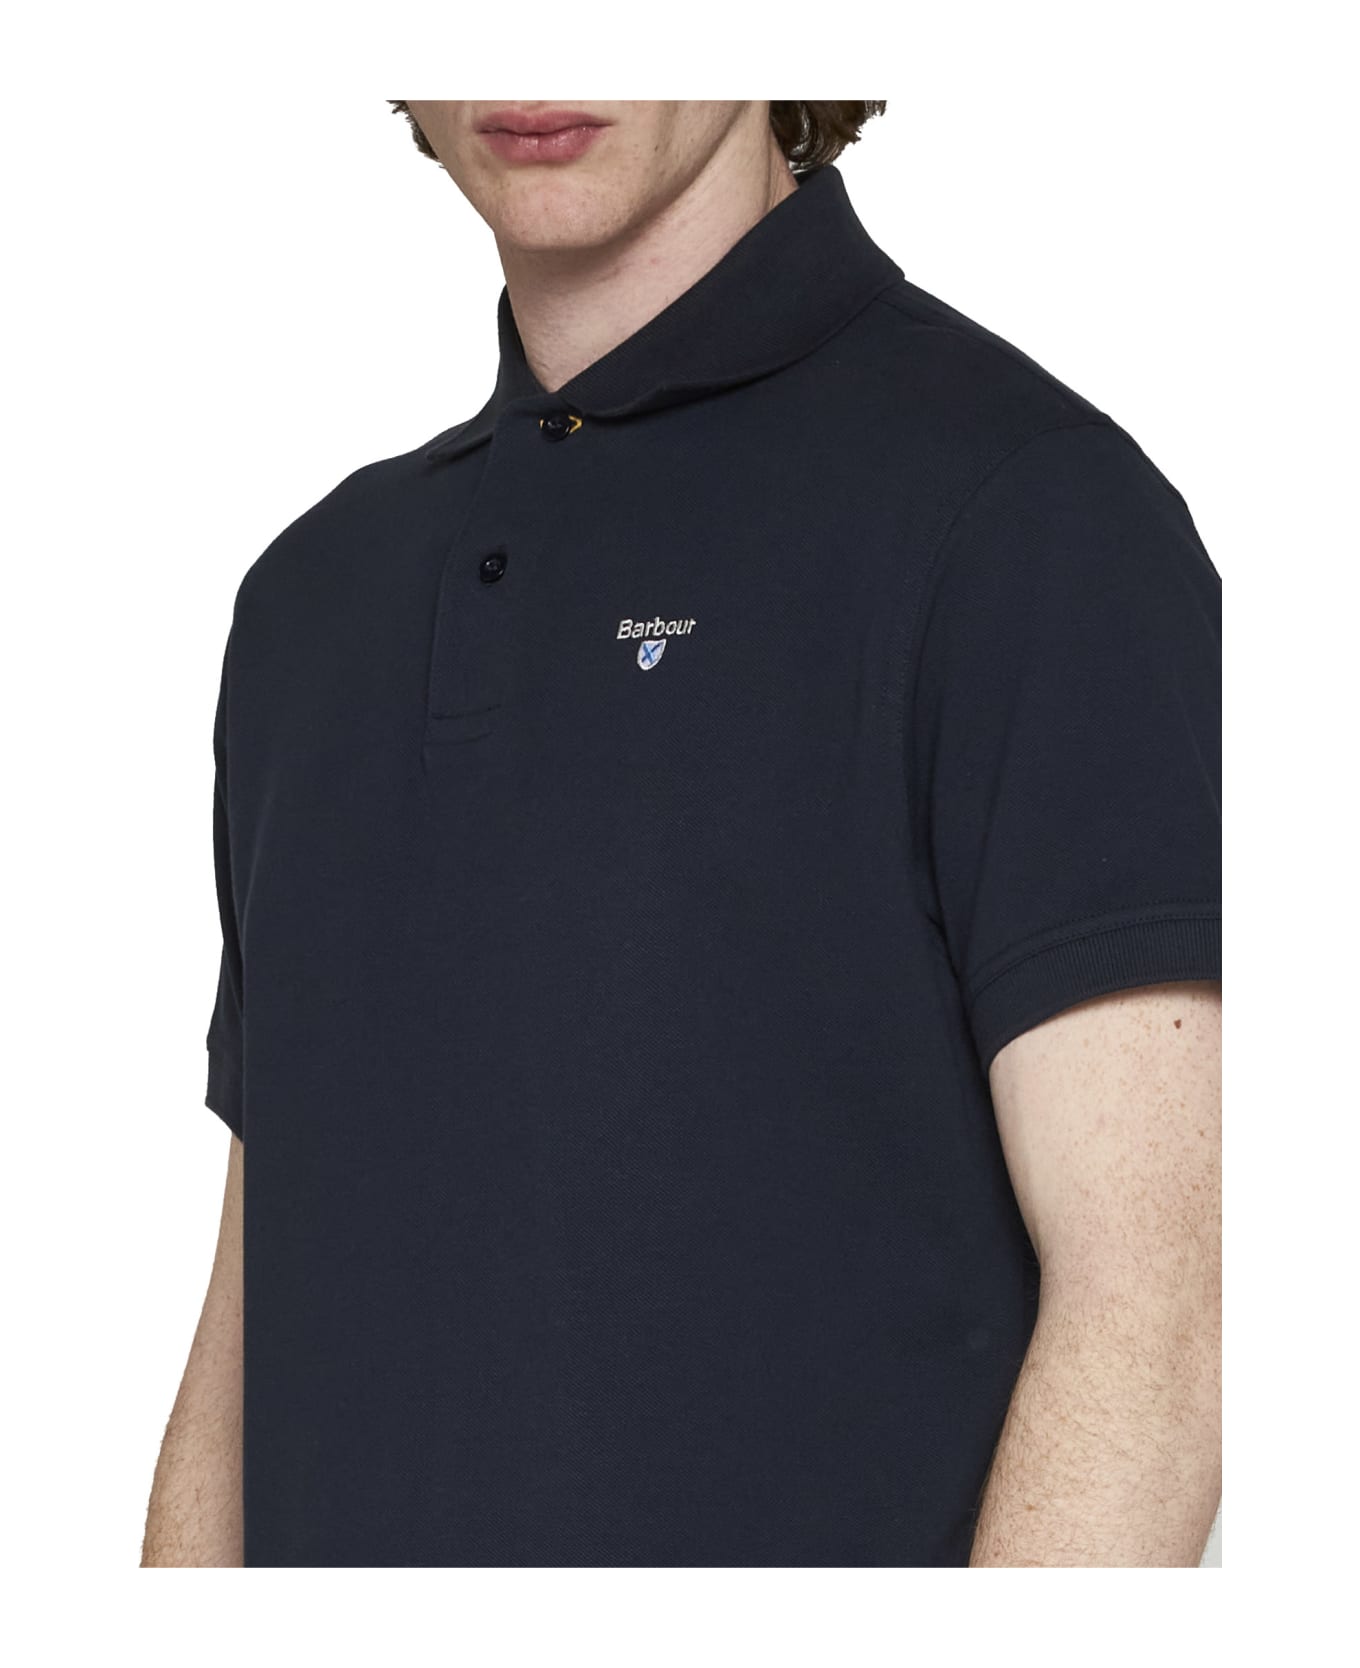 Barbour Polo Shirt - New navy